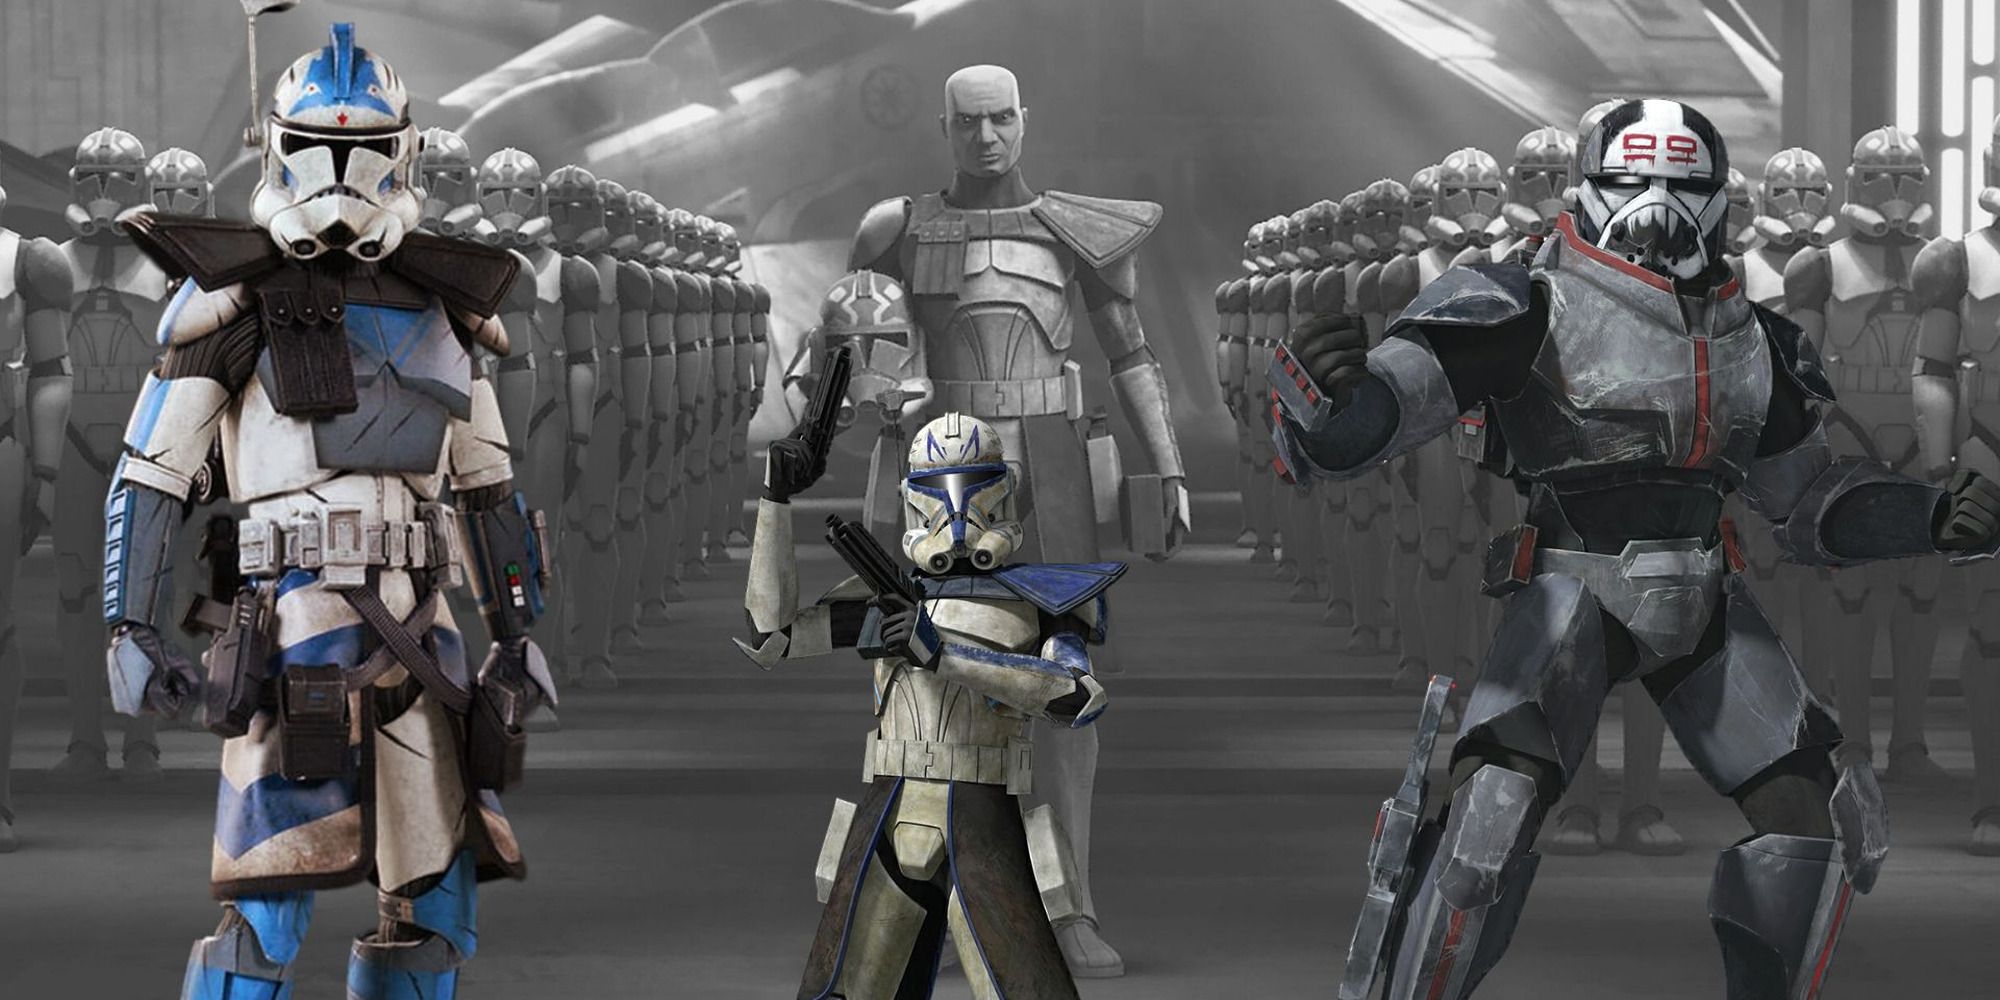 Collage with Fives, Rex, and Wrecker from Star Wars - The Clone Wars